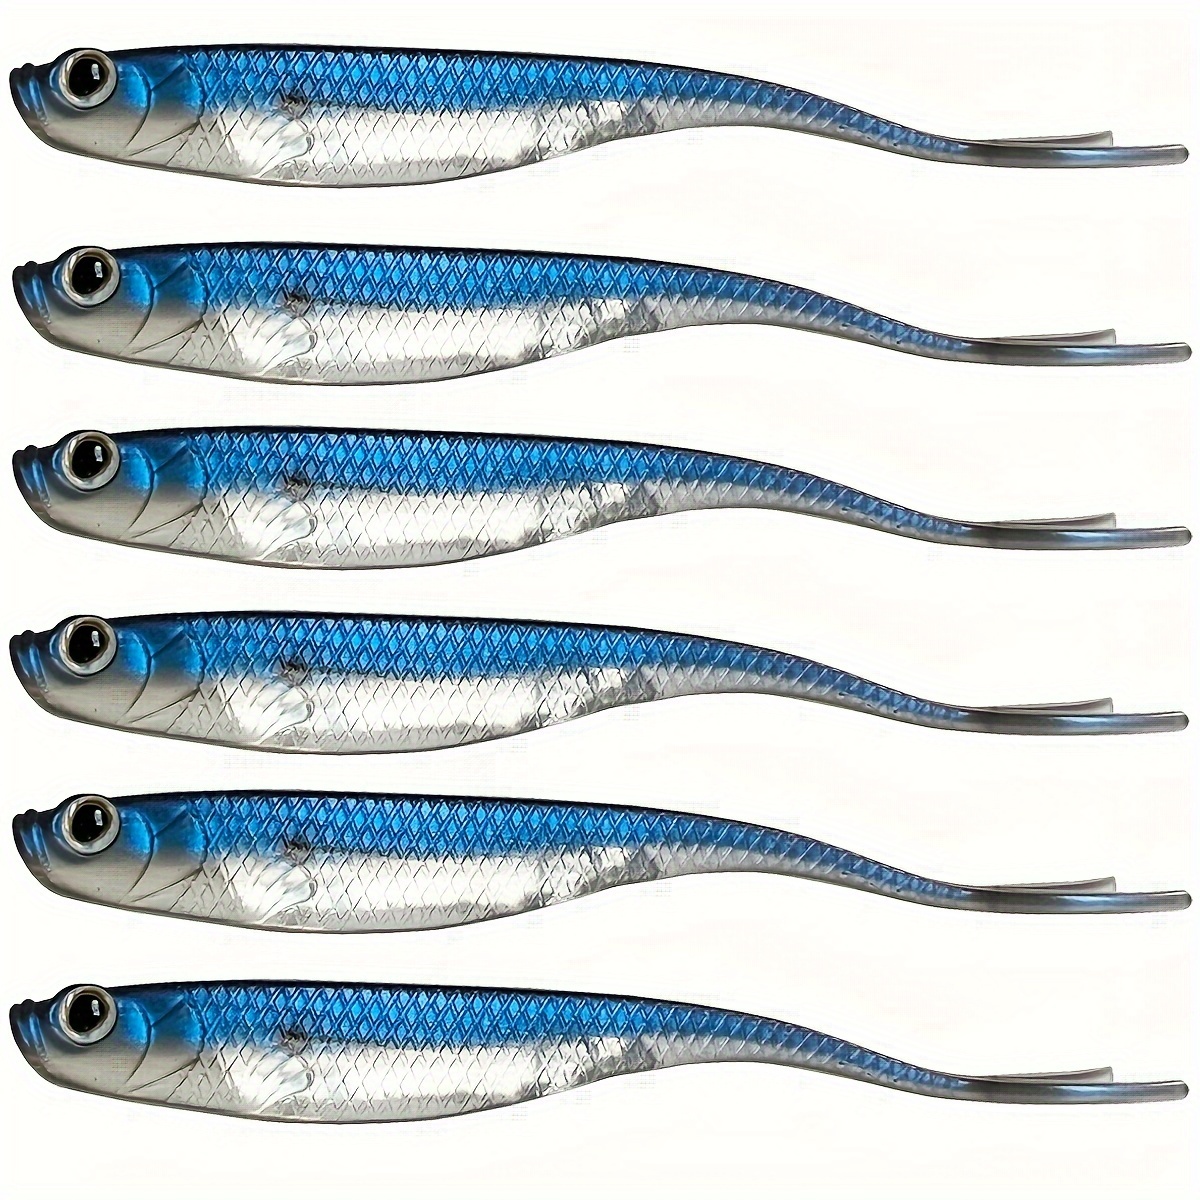 5 PCS Fishing Soft Lures, Plastic Rubber Baits T Type Paddle Tail Saltwater  Freshwater Fishing Worm Artificial Swim Baits, Soft Plastic Lures -   Canada